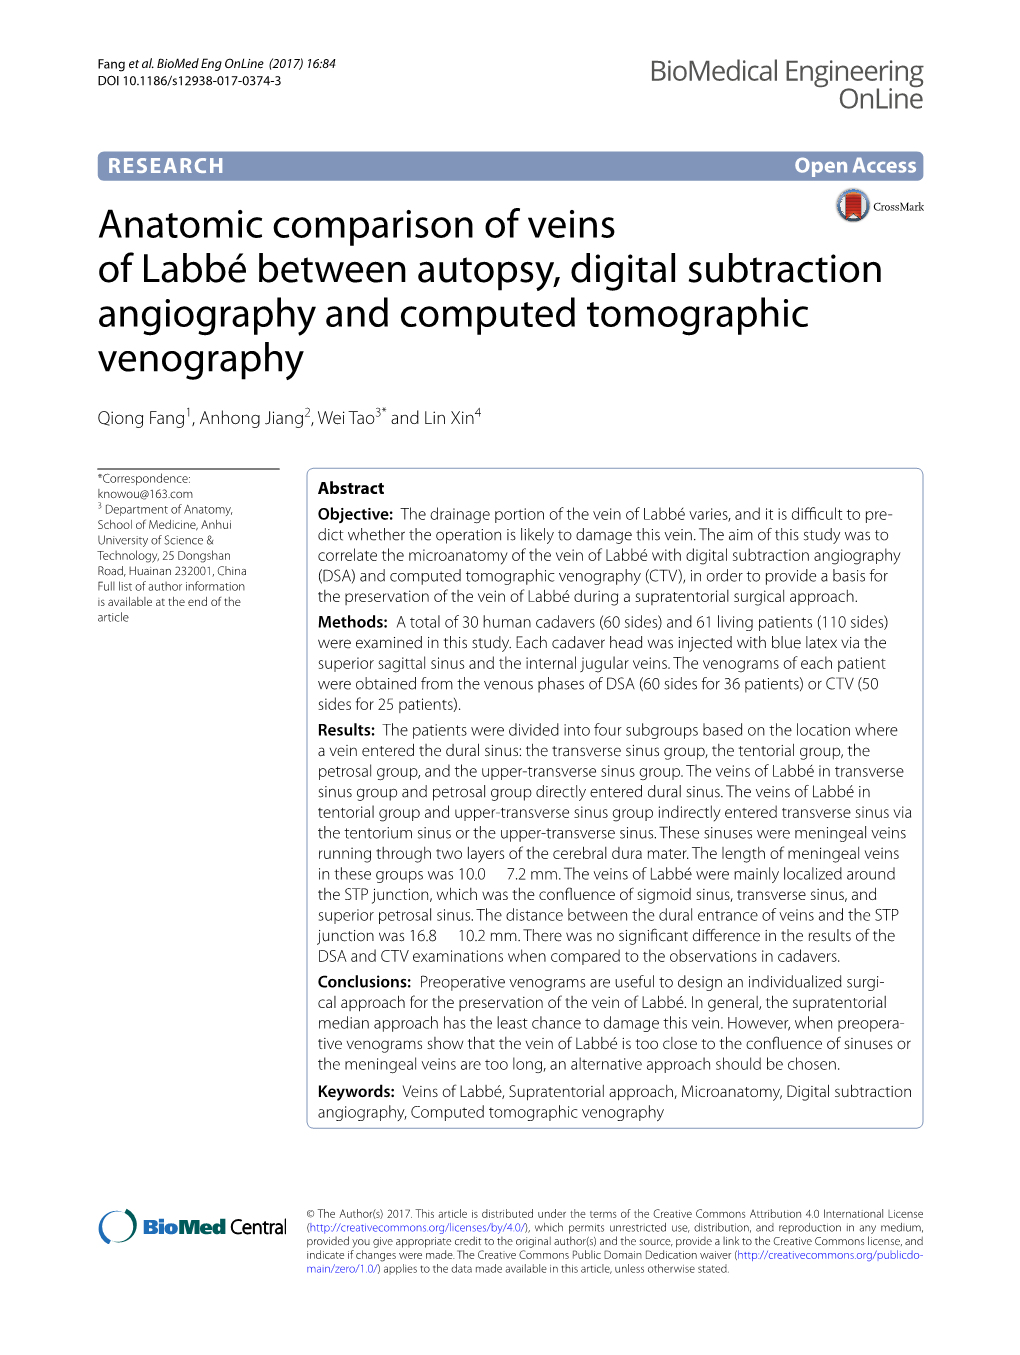 Anatomic Comparison of Veins of Labbé Between Autopsy, Digital Subtraction Angiography and Computed Tomographic Venography